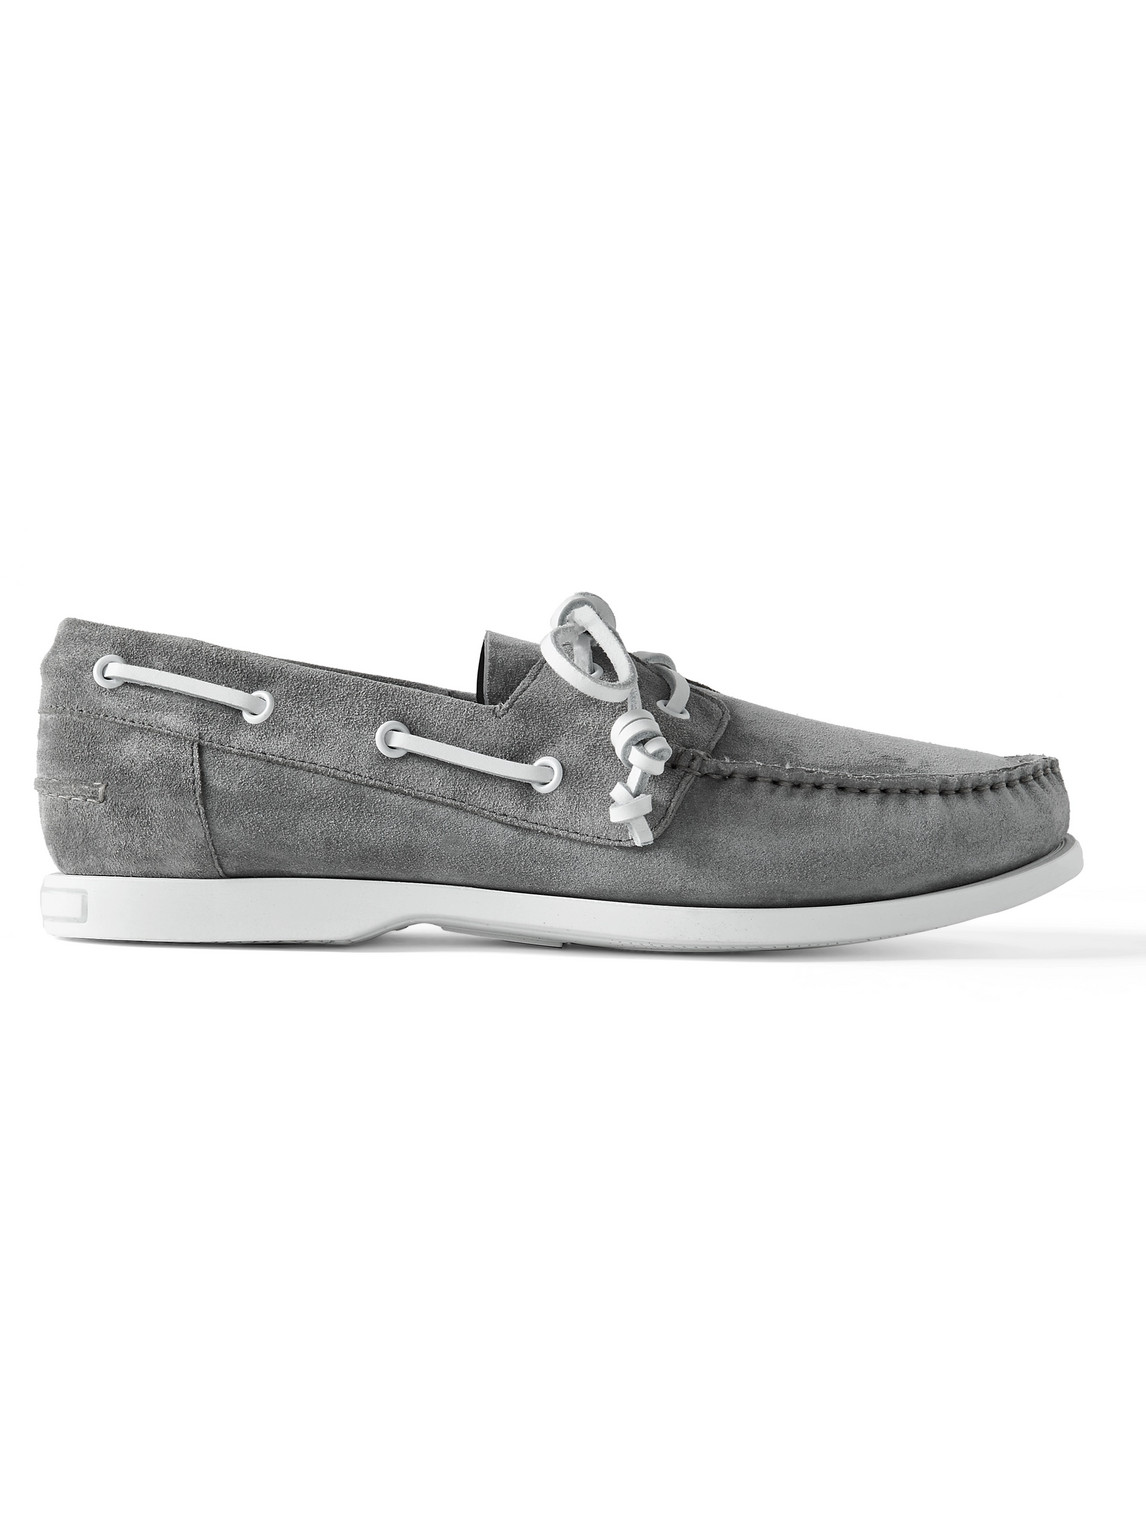 Sidmouth Suede Boat Shoes